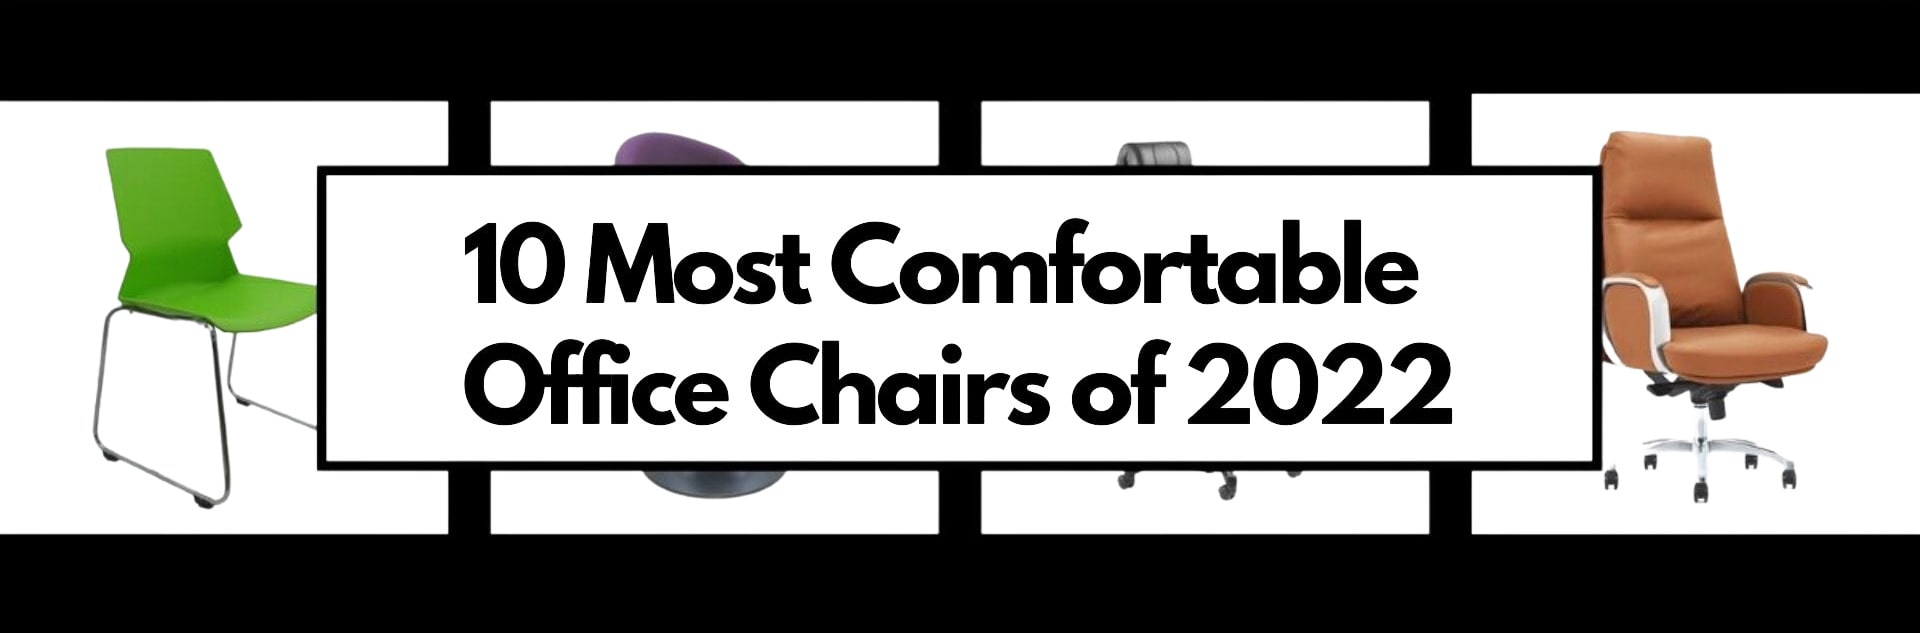 Ten most comfortable office chairs of 2022.